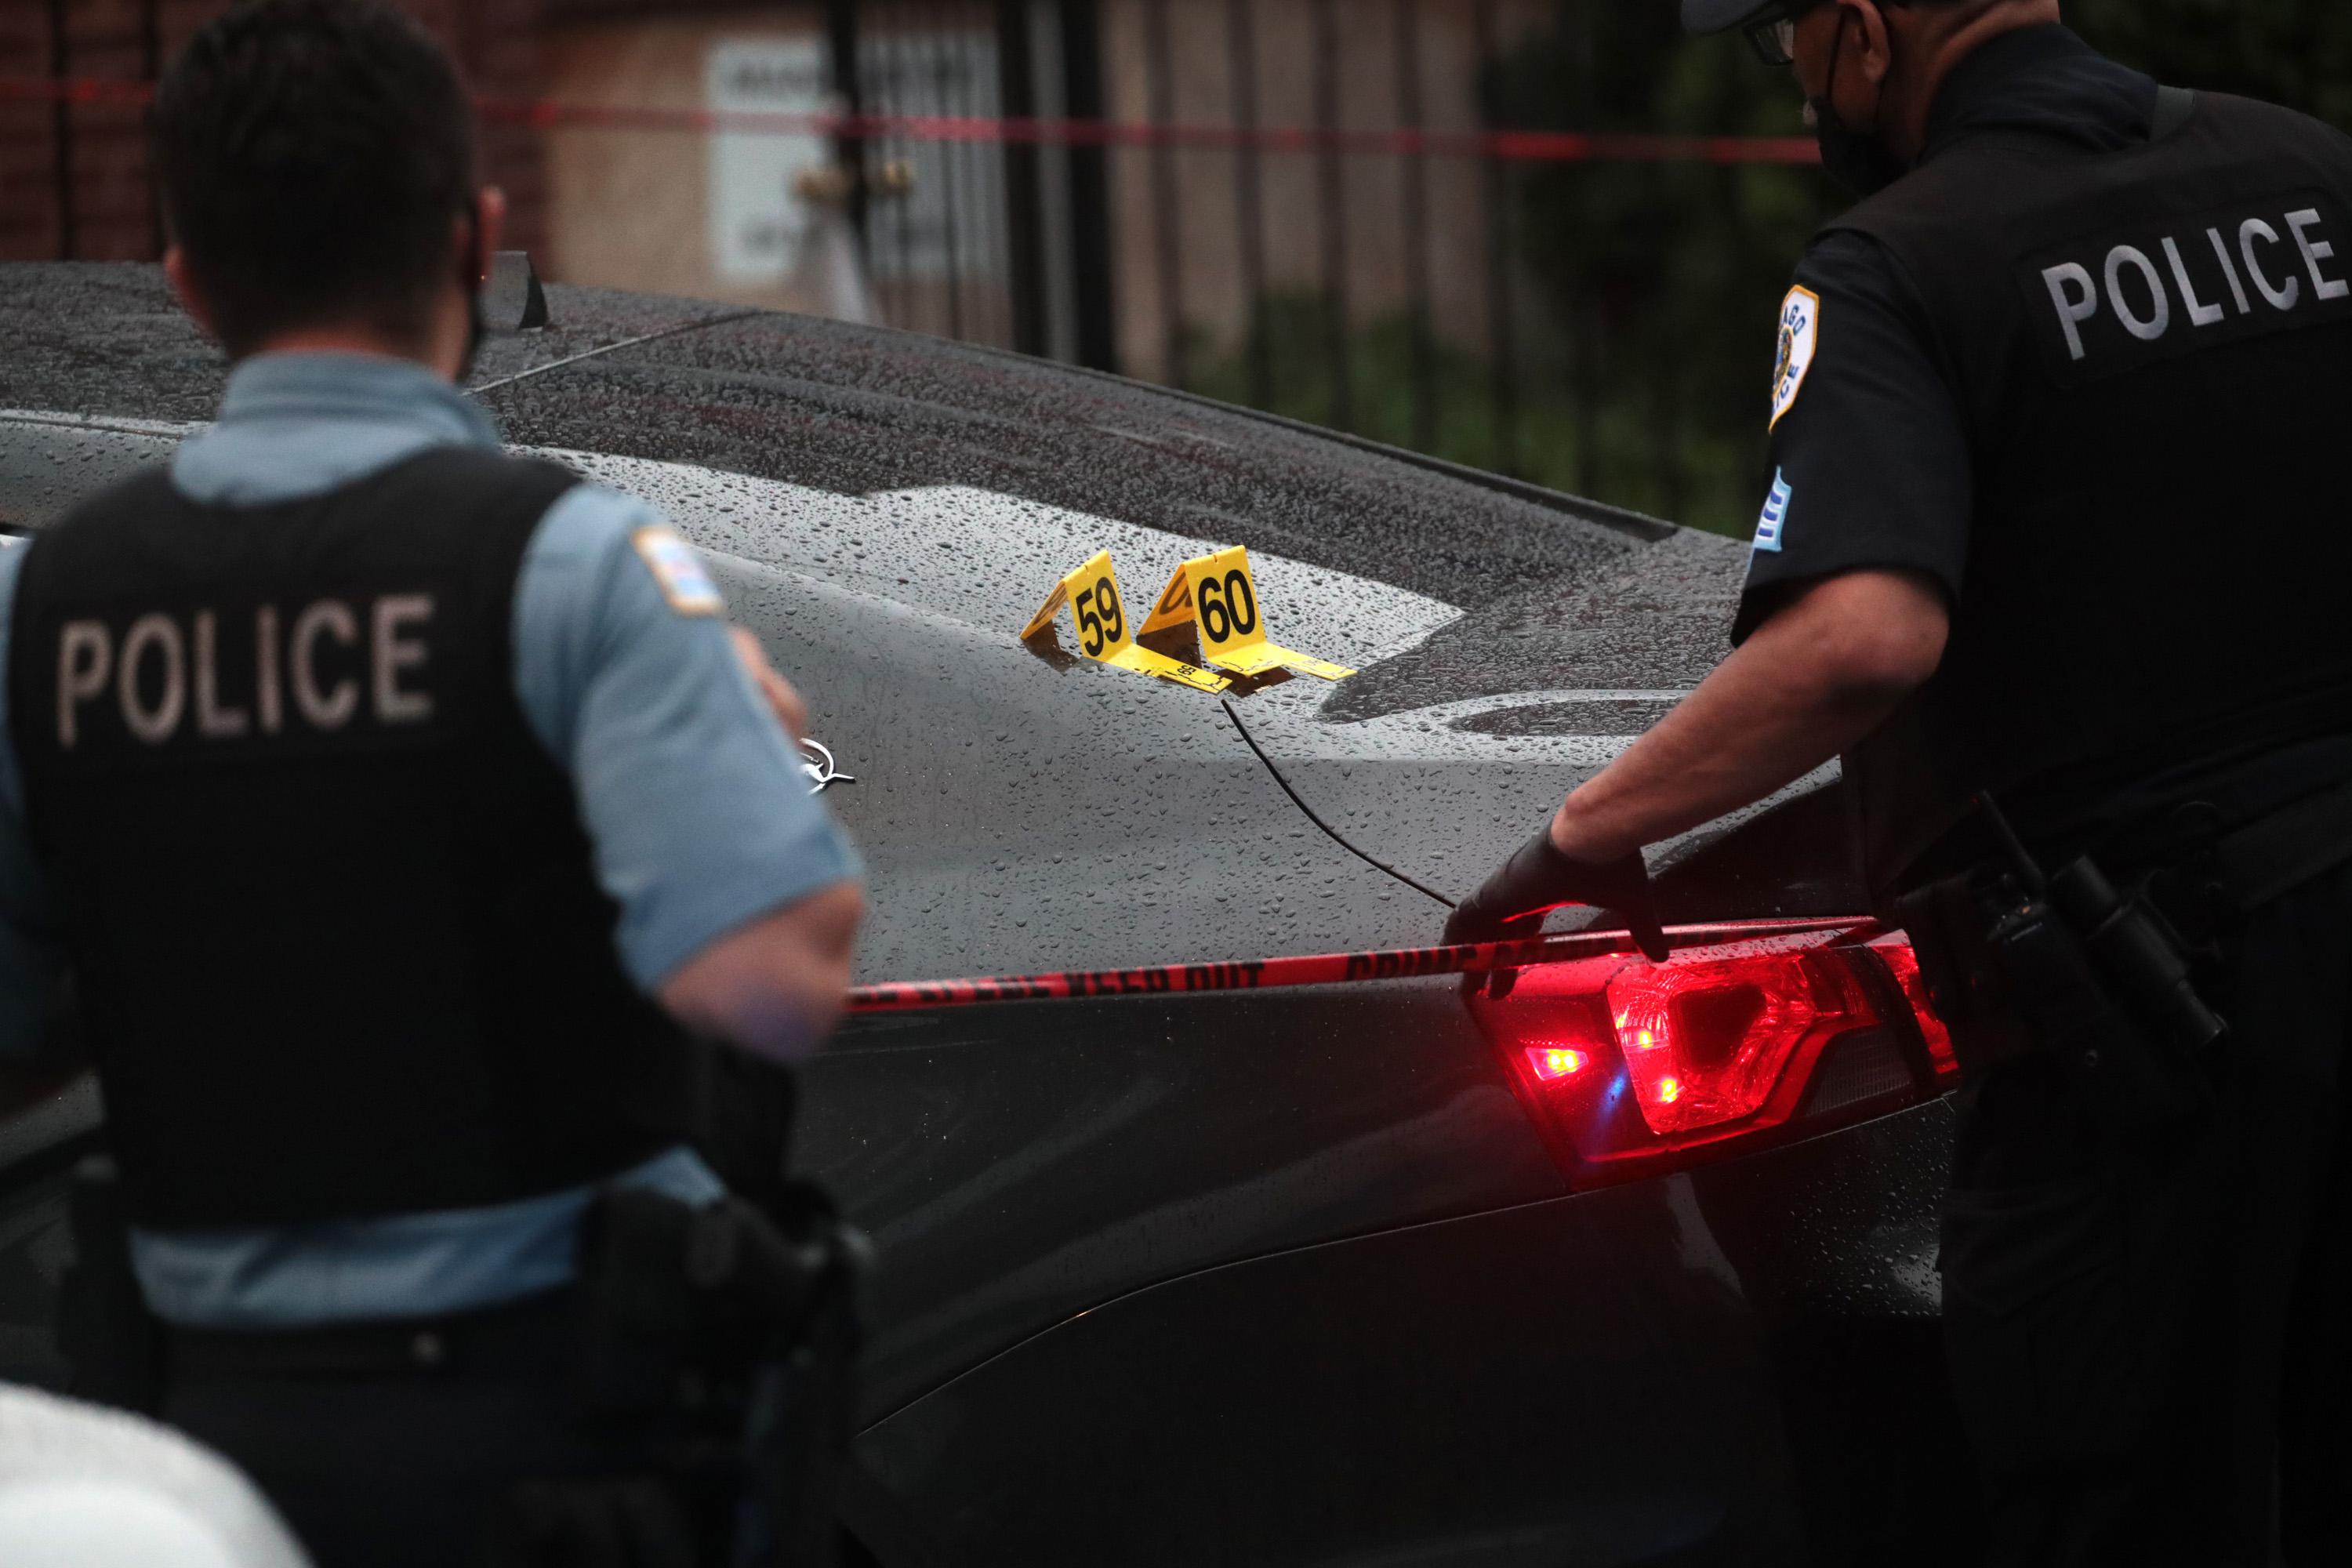 Shell casings labeled 59 and 60 rest on a bullet-riddled car as police investigate the scene of a shooting in the Auburn Gresham neighborhood of Chicago on July 21, 2020